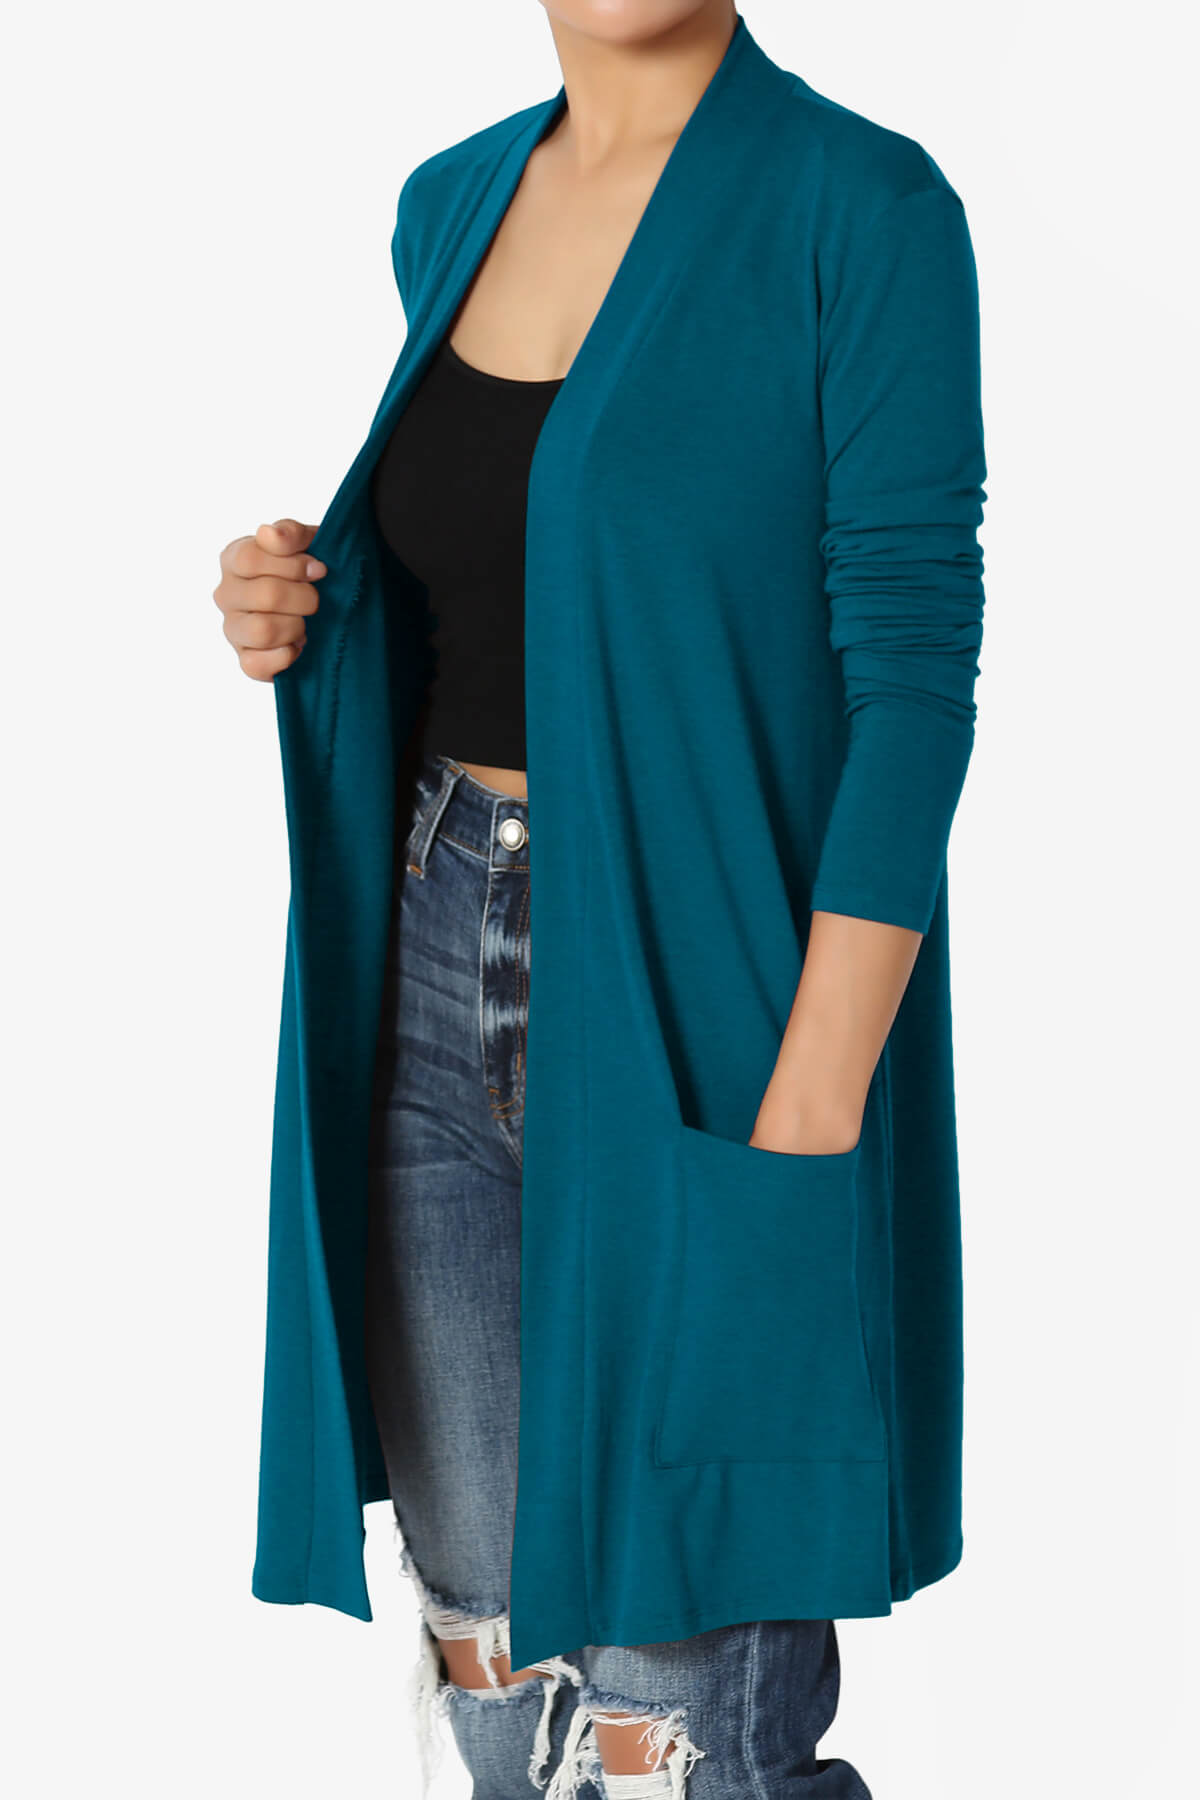 Daday Long Sleeve Pocket Open Front Cardigan TEAL_3